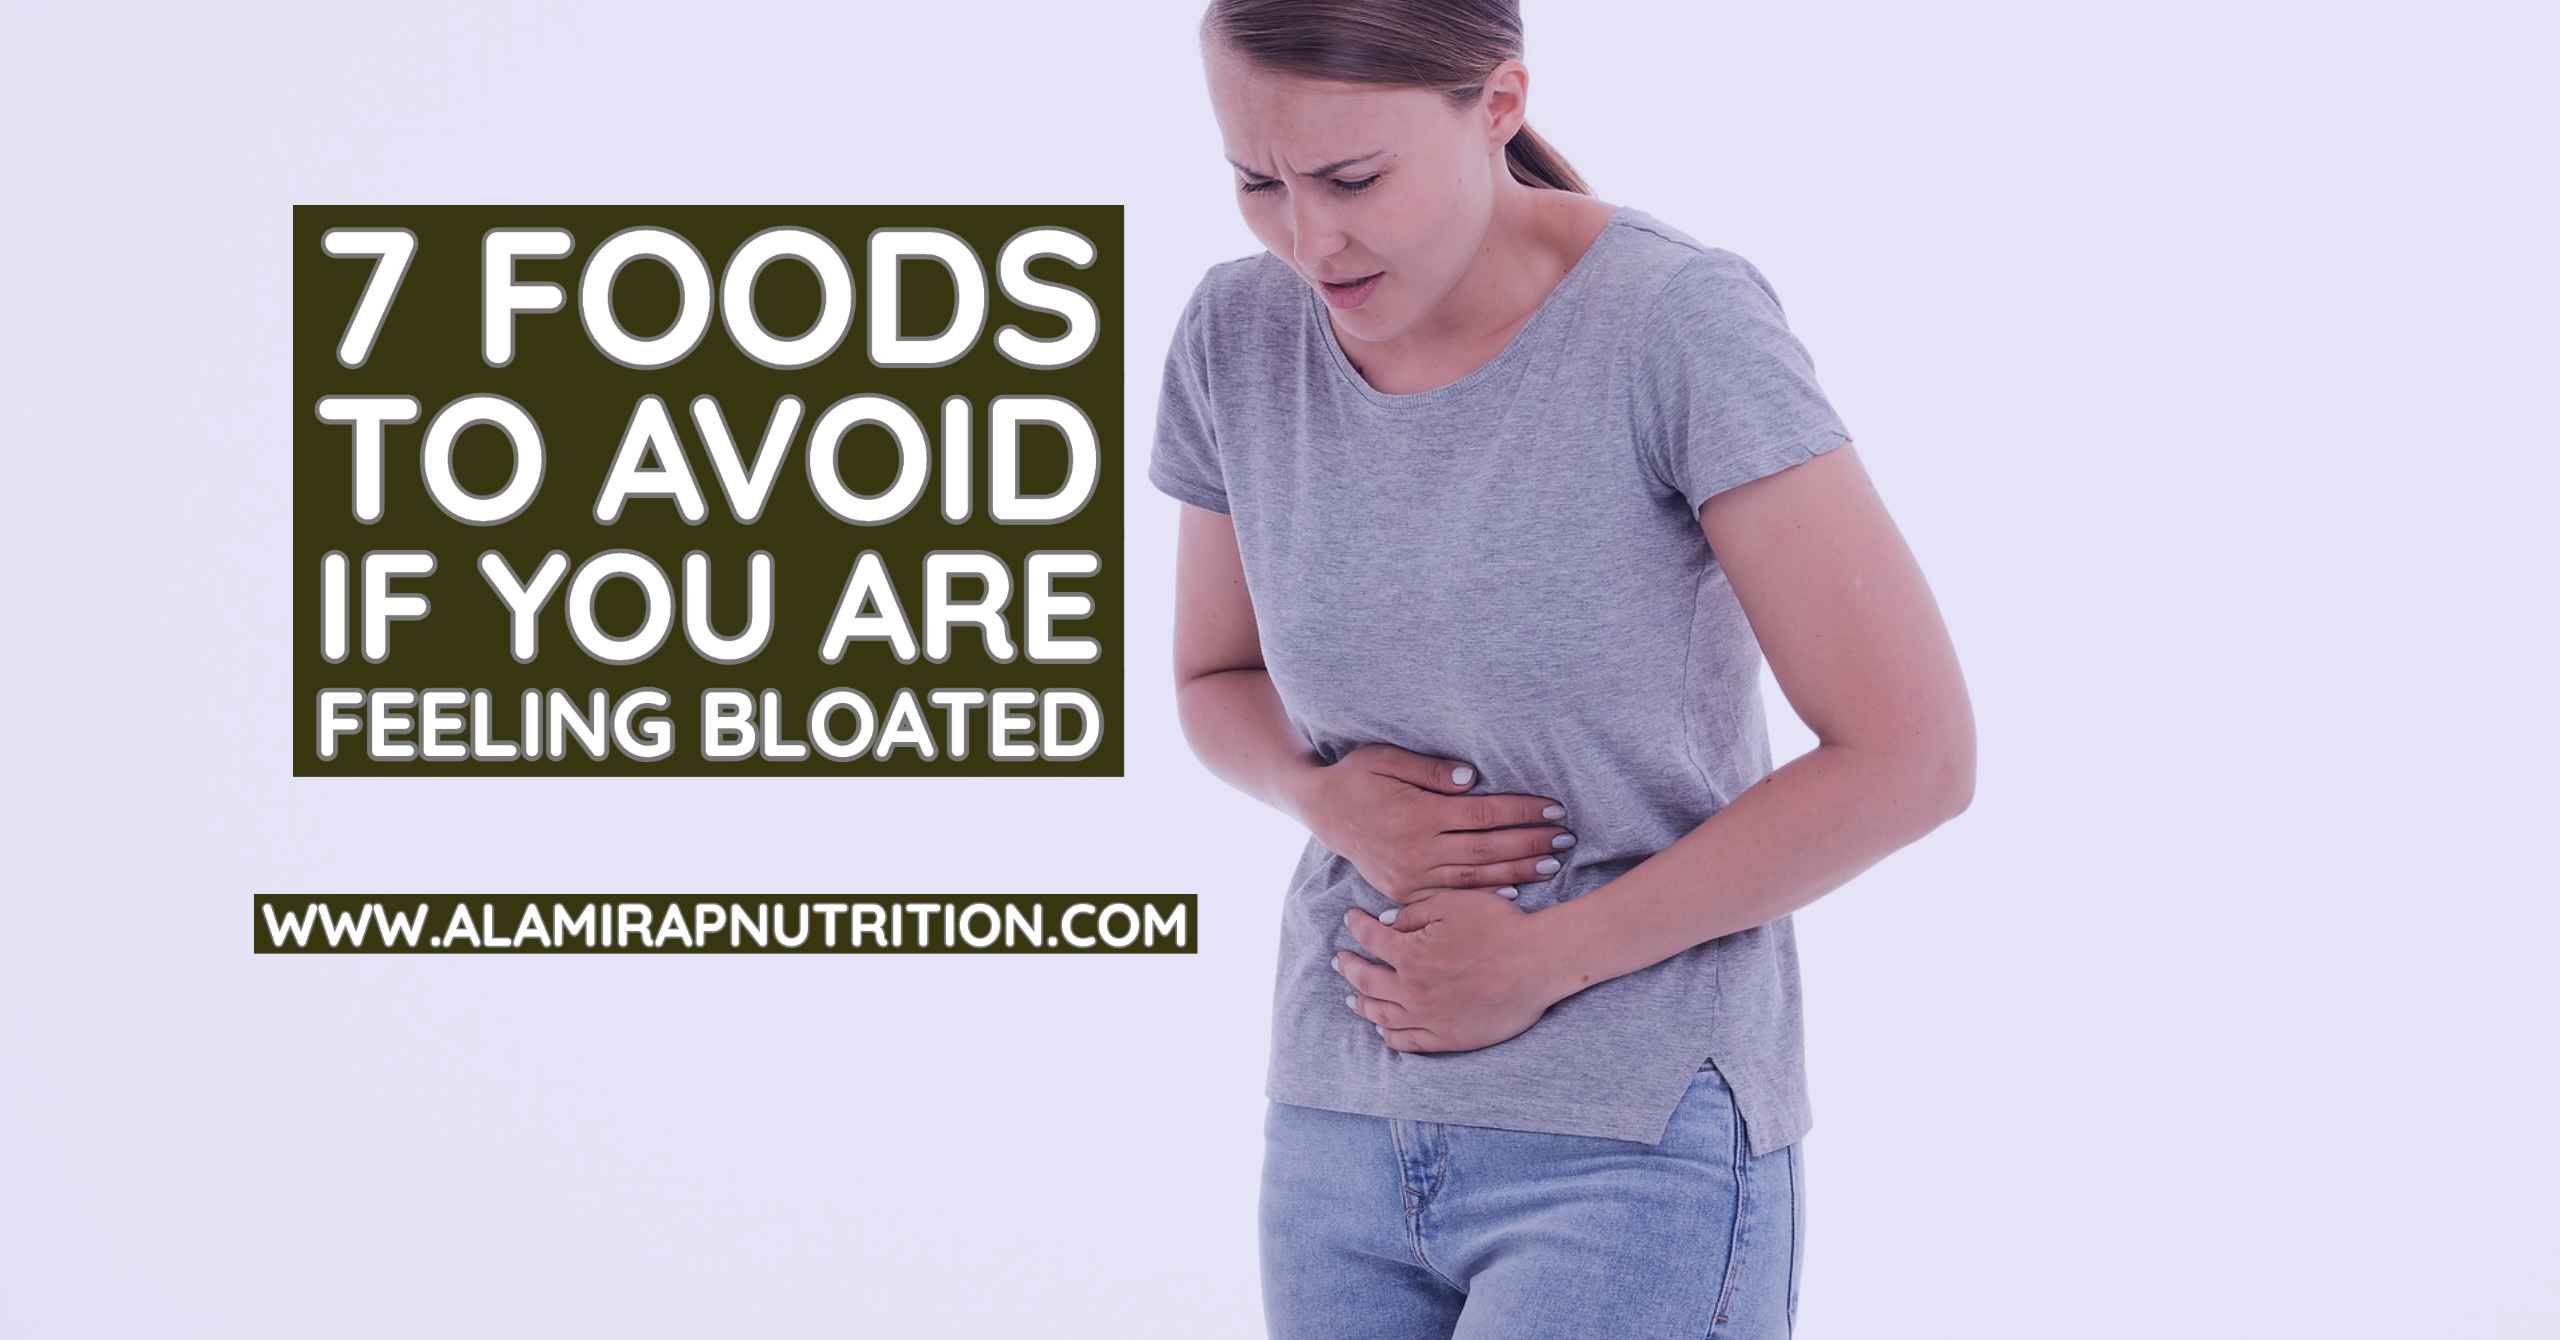 7 Foods to Avoid if You are Feeling Bloated